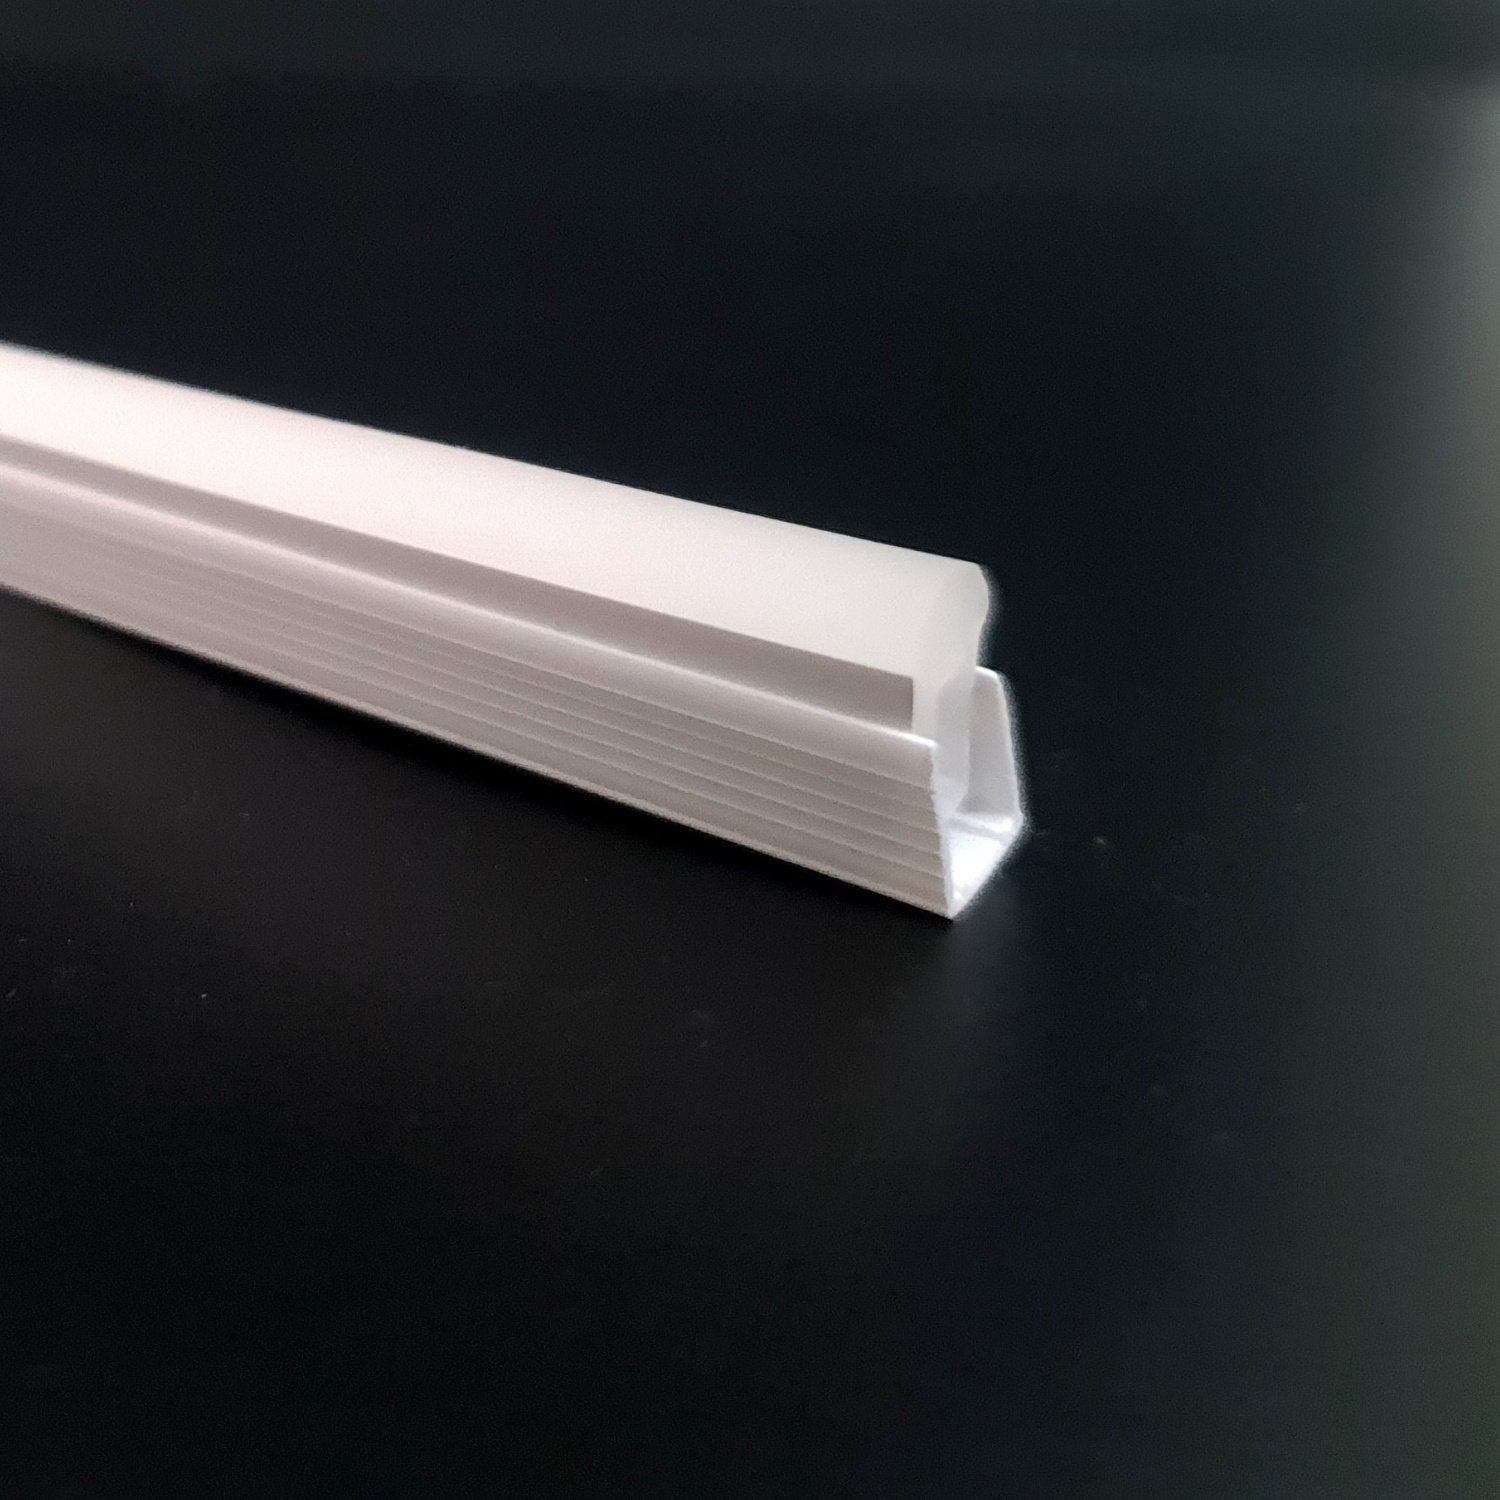 Rigid PVC, per foot Mounting Track (Channel Type) for Neon LED